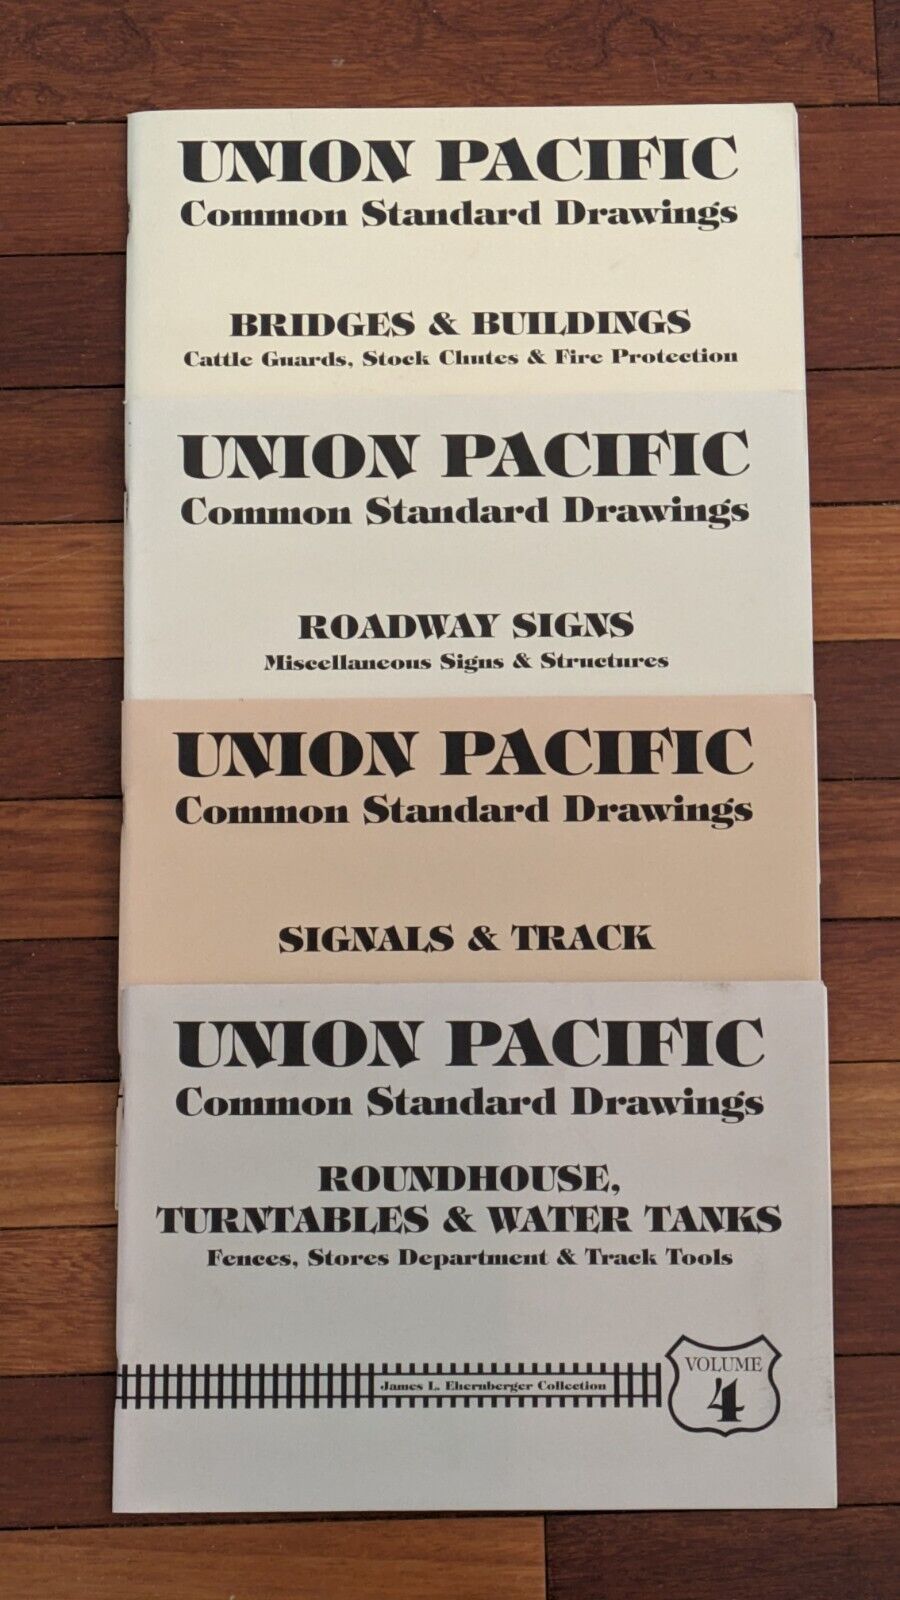 Union Pacific Standard Drawings Volumes 1, 2, 3 & 4  Ehernberger Collection